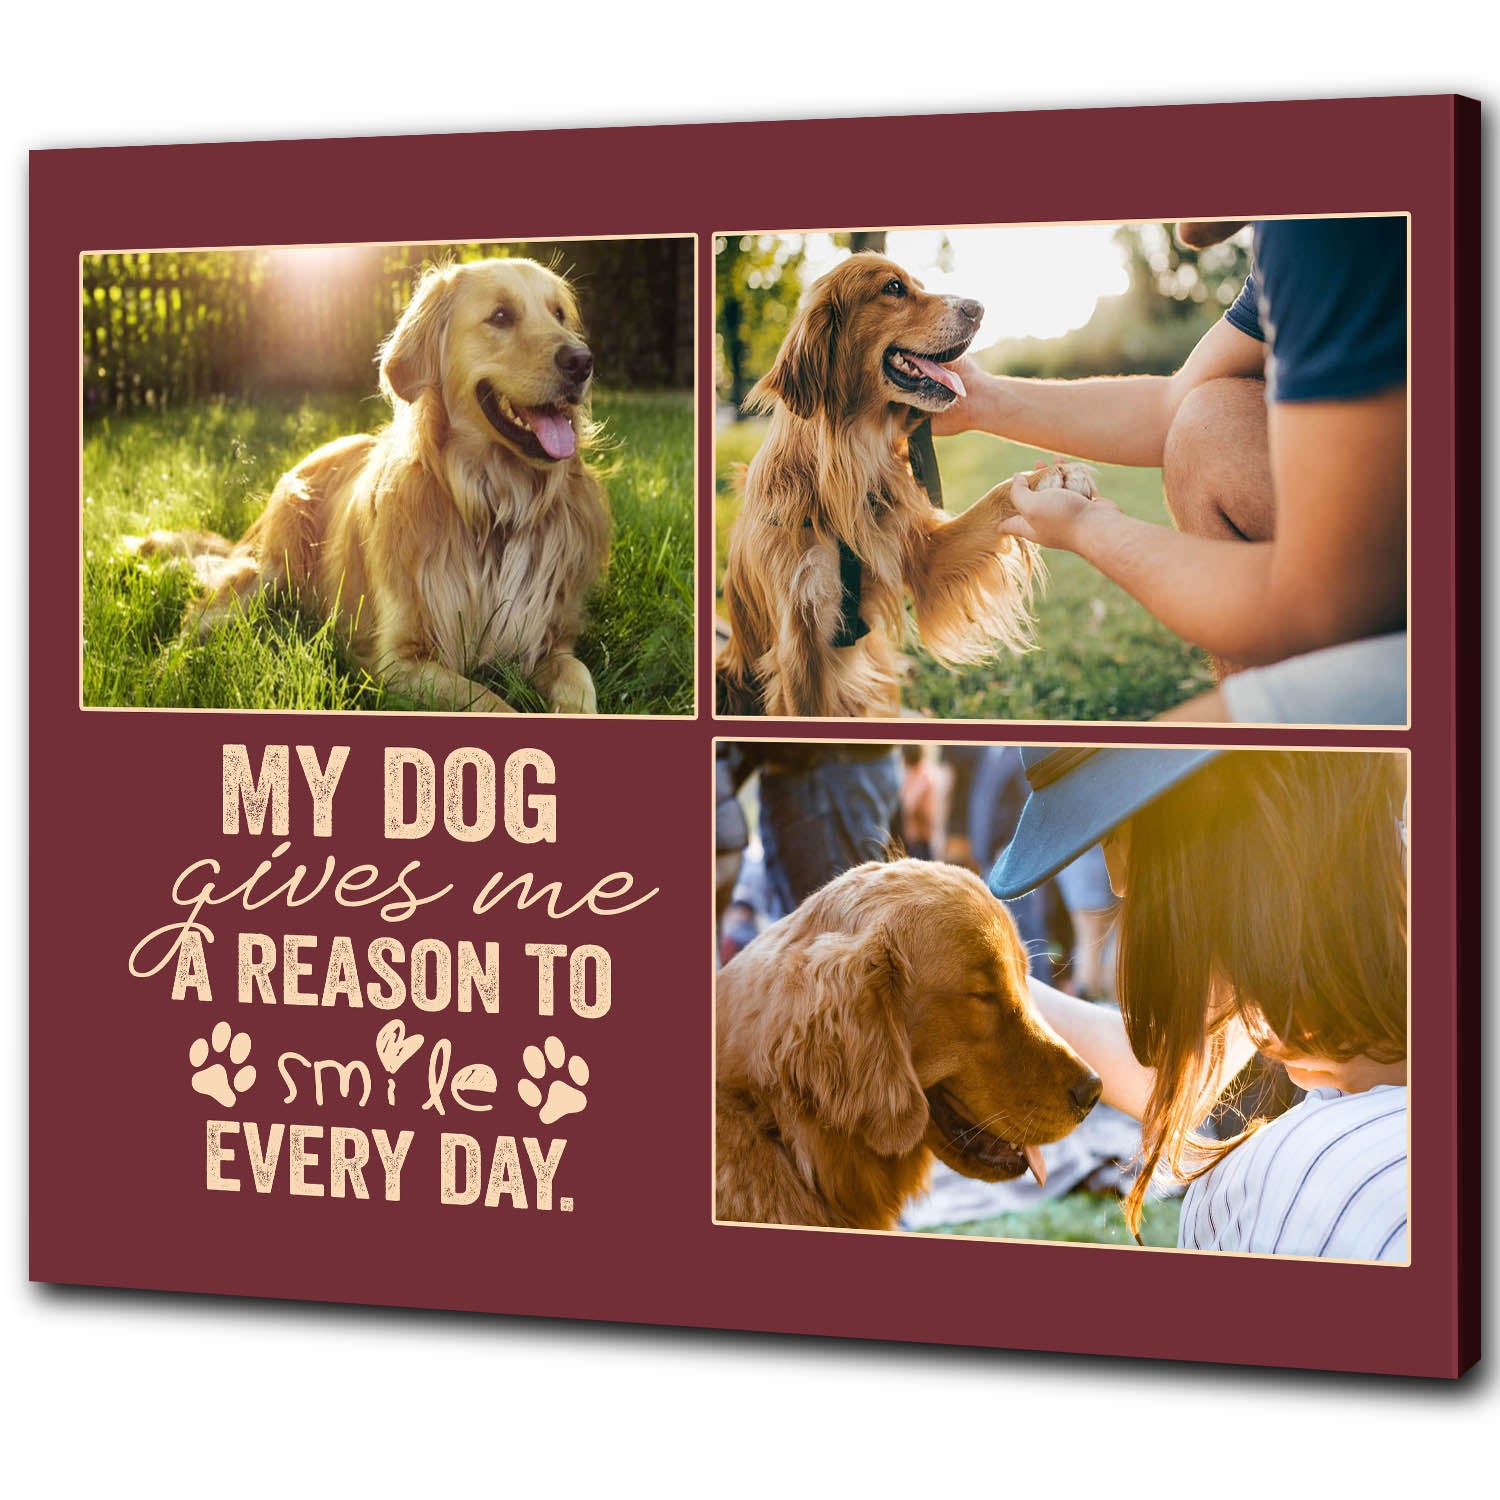 My Dog Gives Me A Reason To Smile Everyday| Custom Dog Photo Collage Canvas| Dog Sign Dog Theme Gift| JCD817